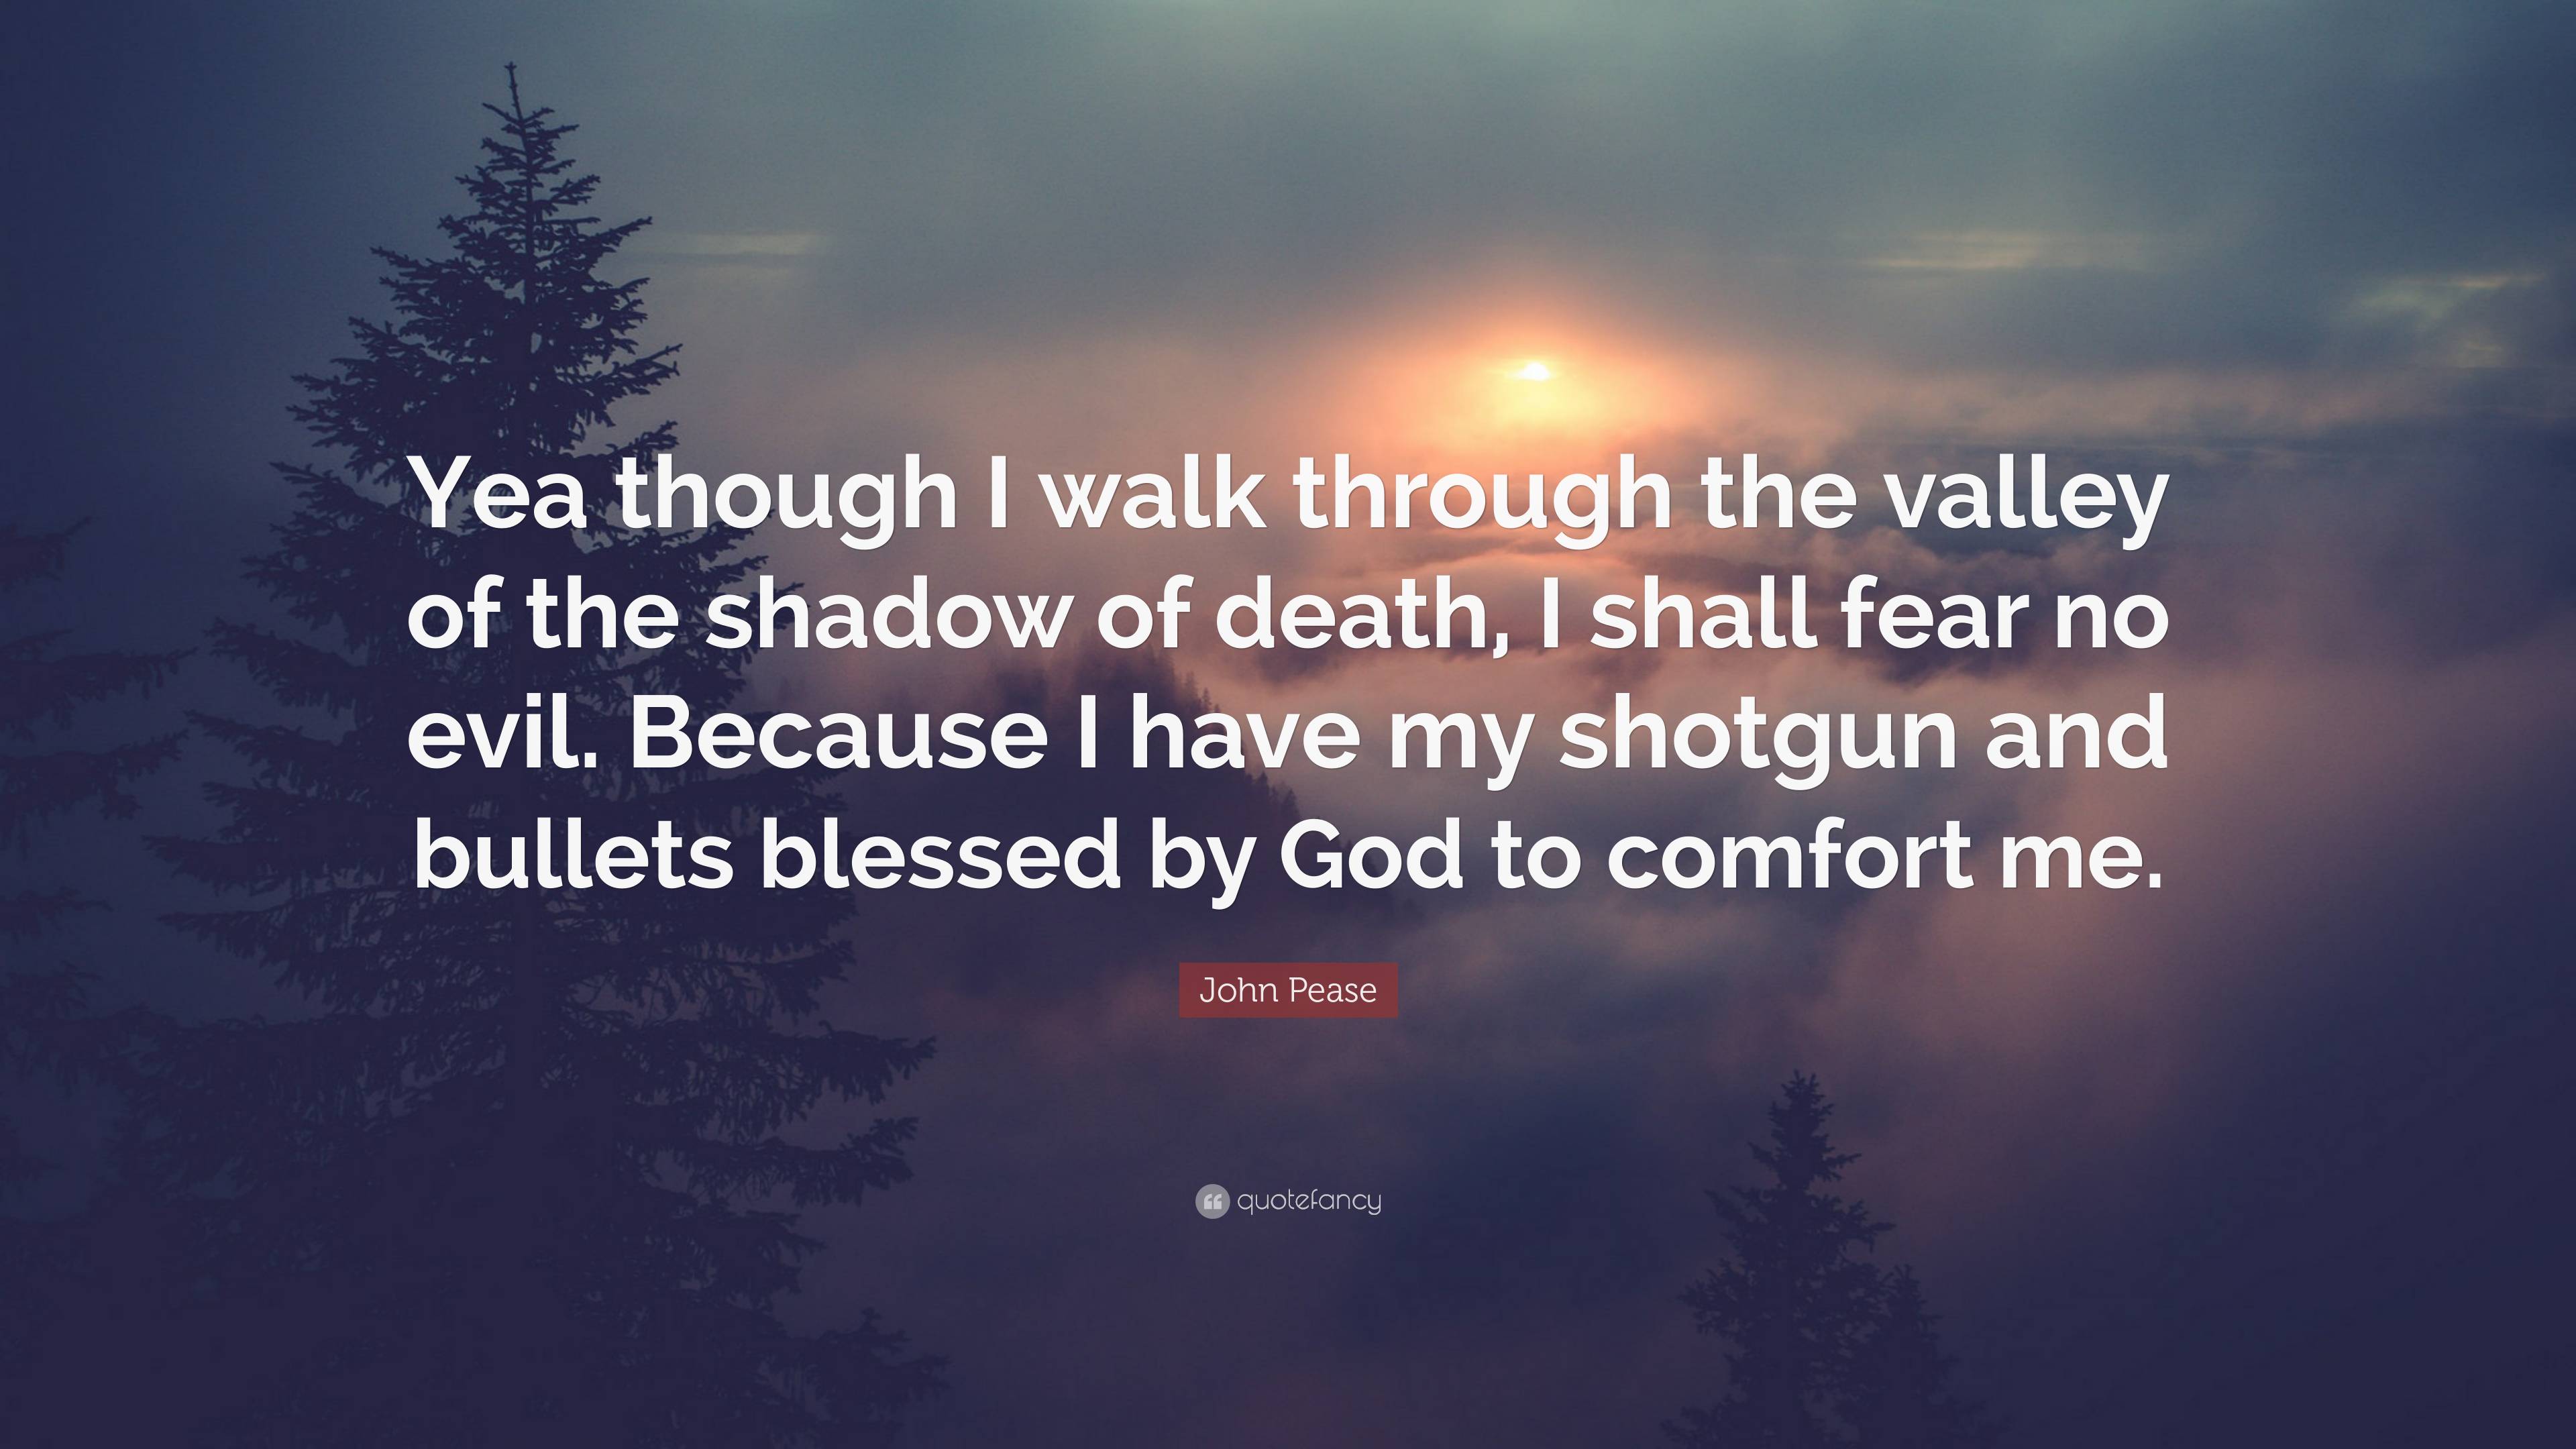 John Pease Quote: “Yea though I walk through the valley of the shadow ...